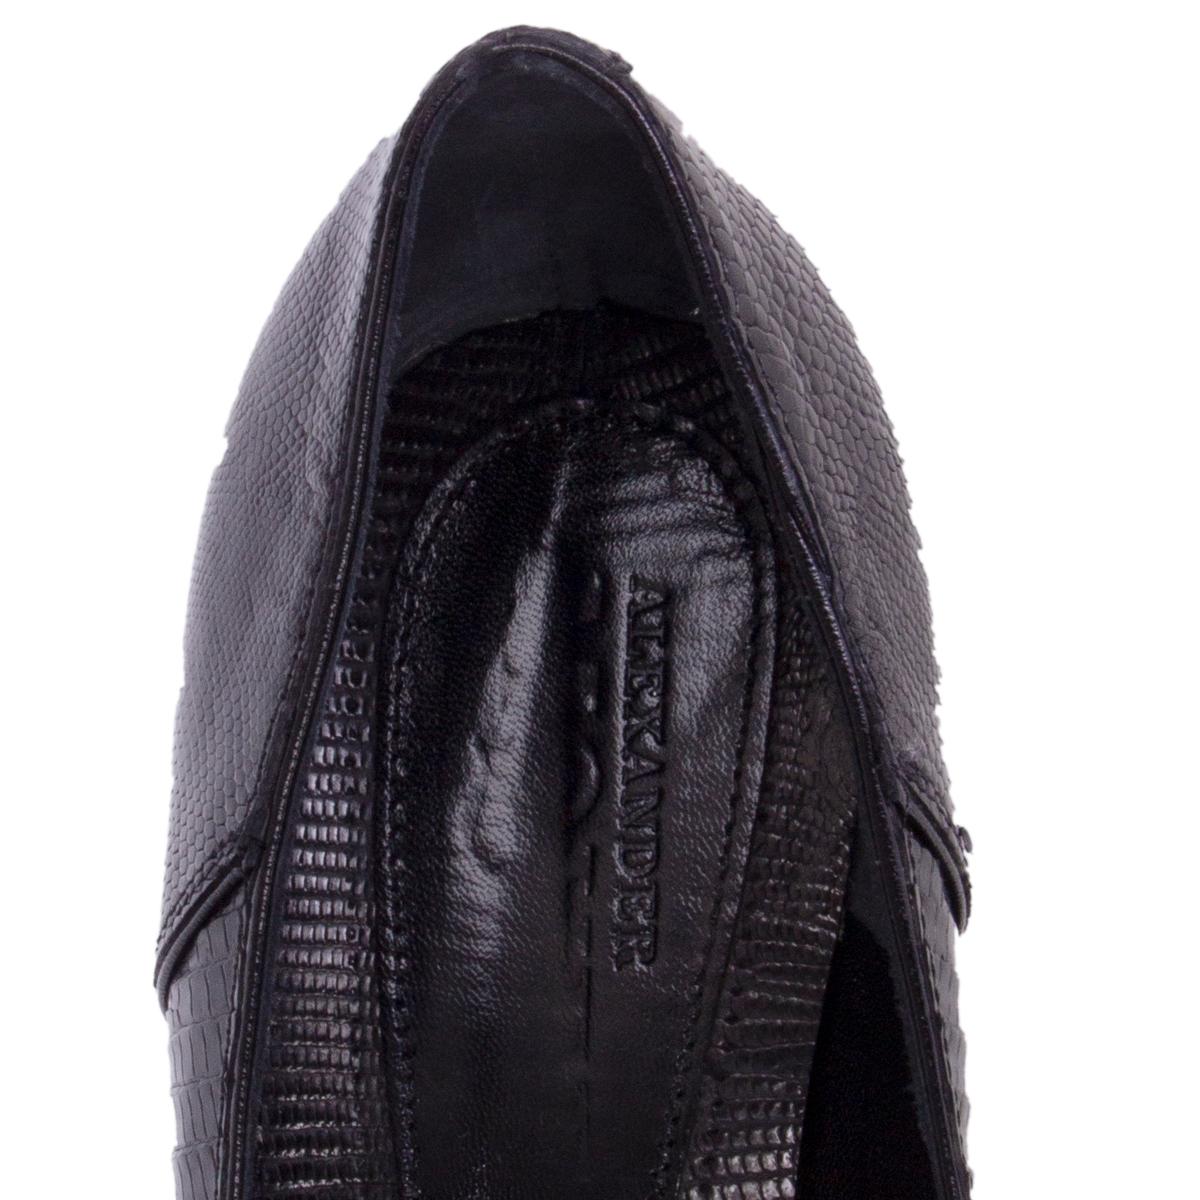 ALEXANDER MCQUEEN black leather LIZARD EMBOSSDED Pointed Toe Pumps Shoes 39.5 1